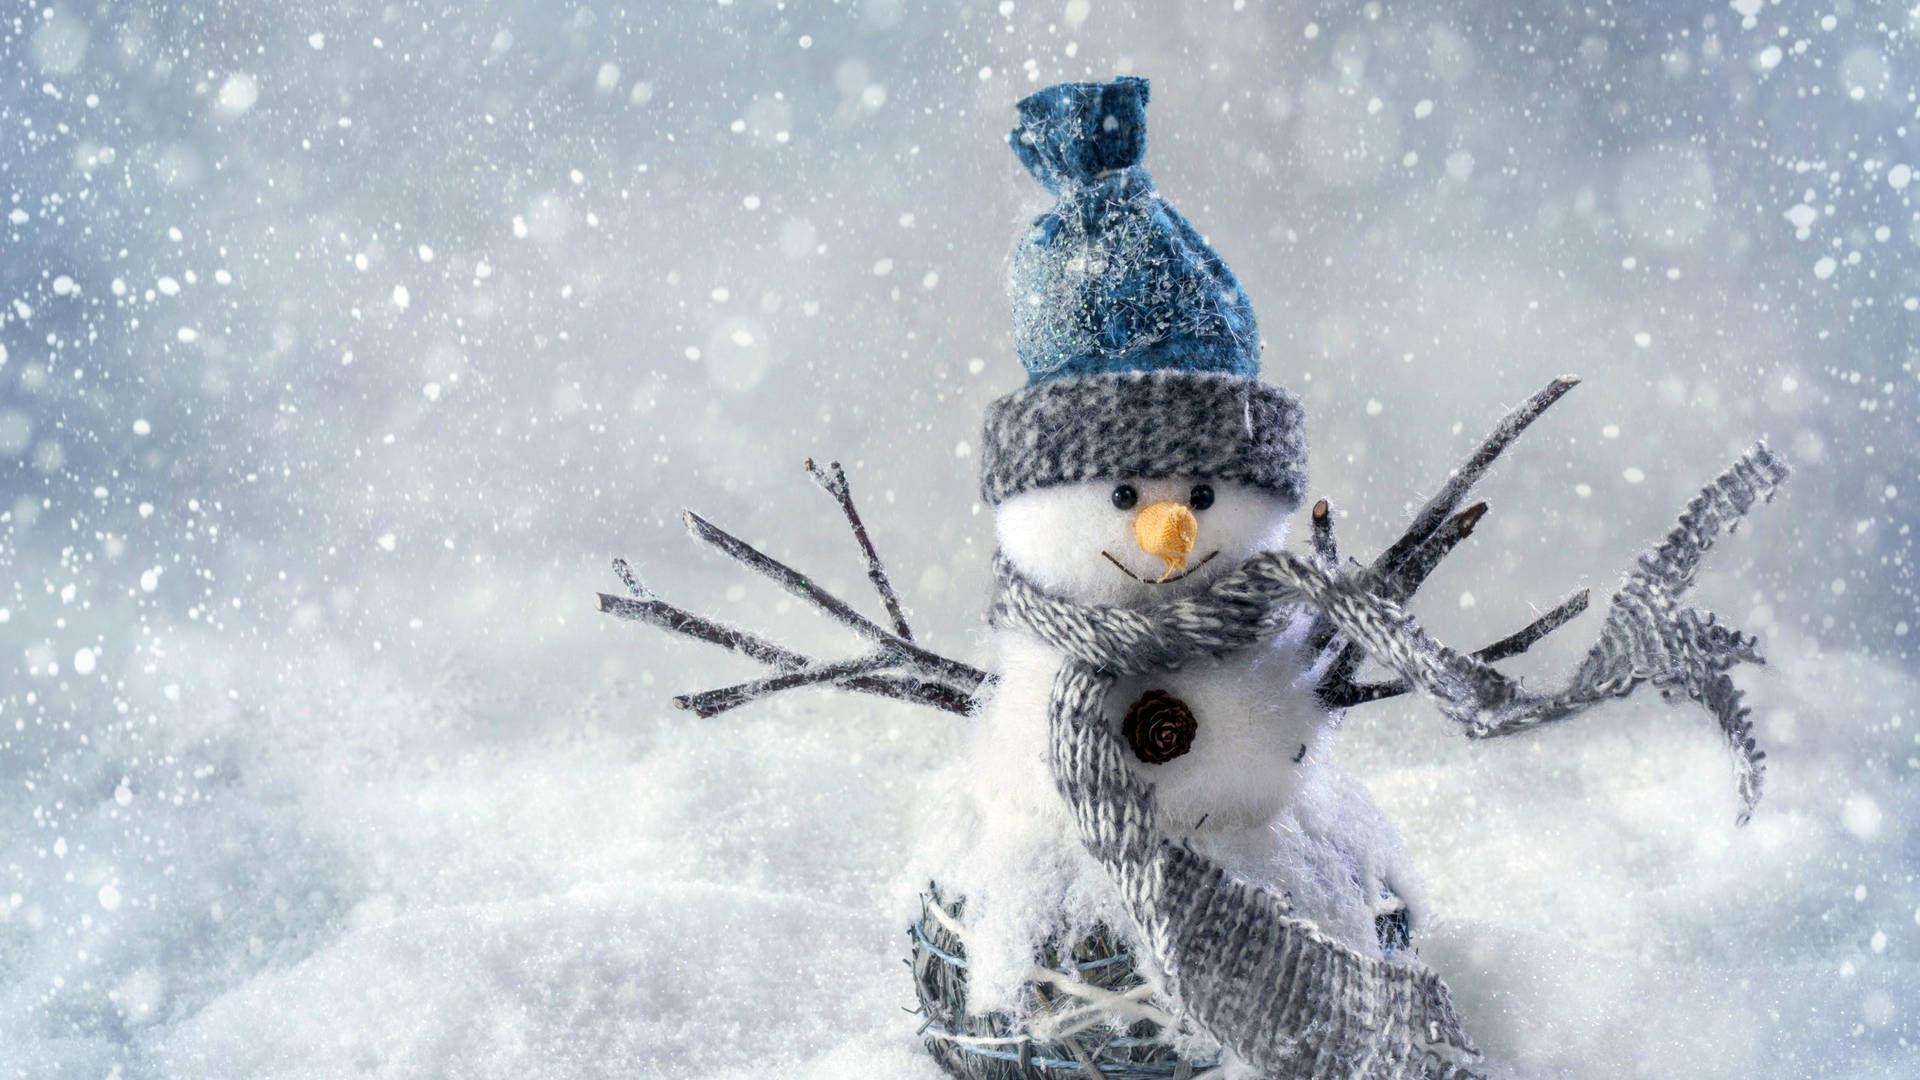 A close-up of a cute snowman - Winter Is Here! Wallpaper